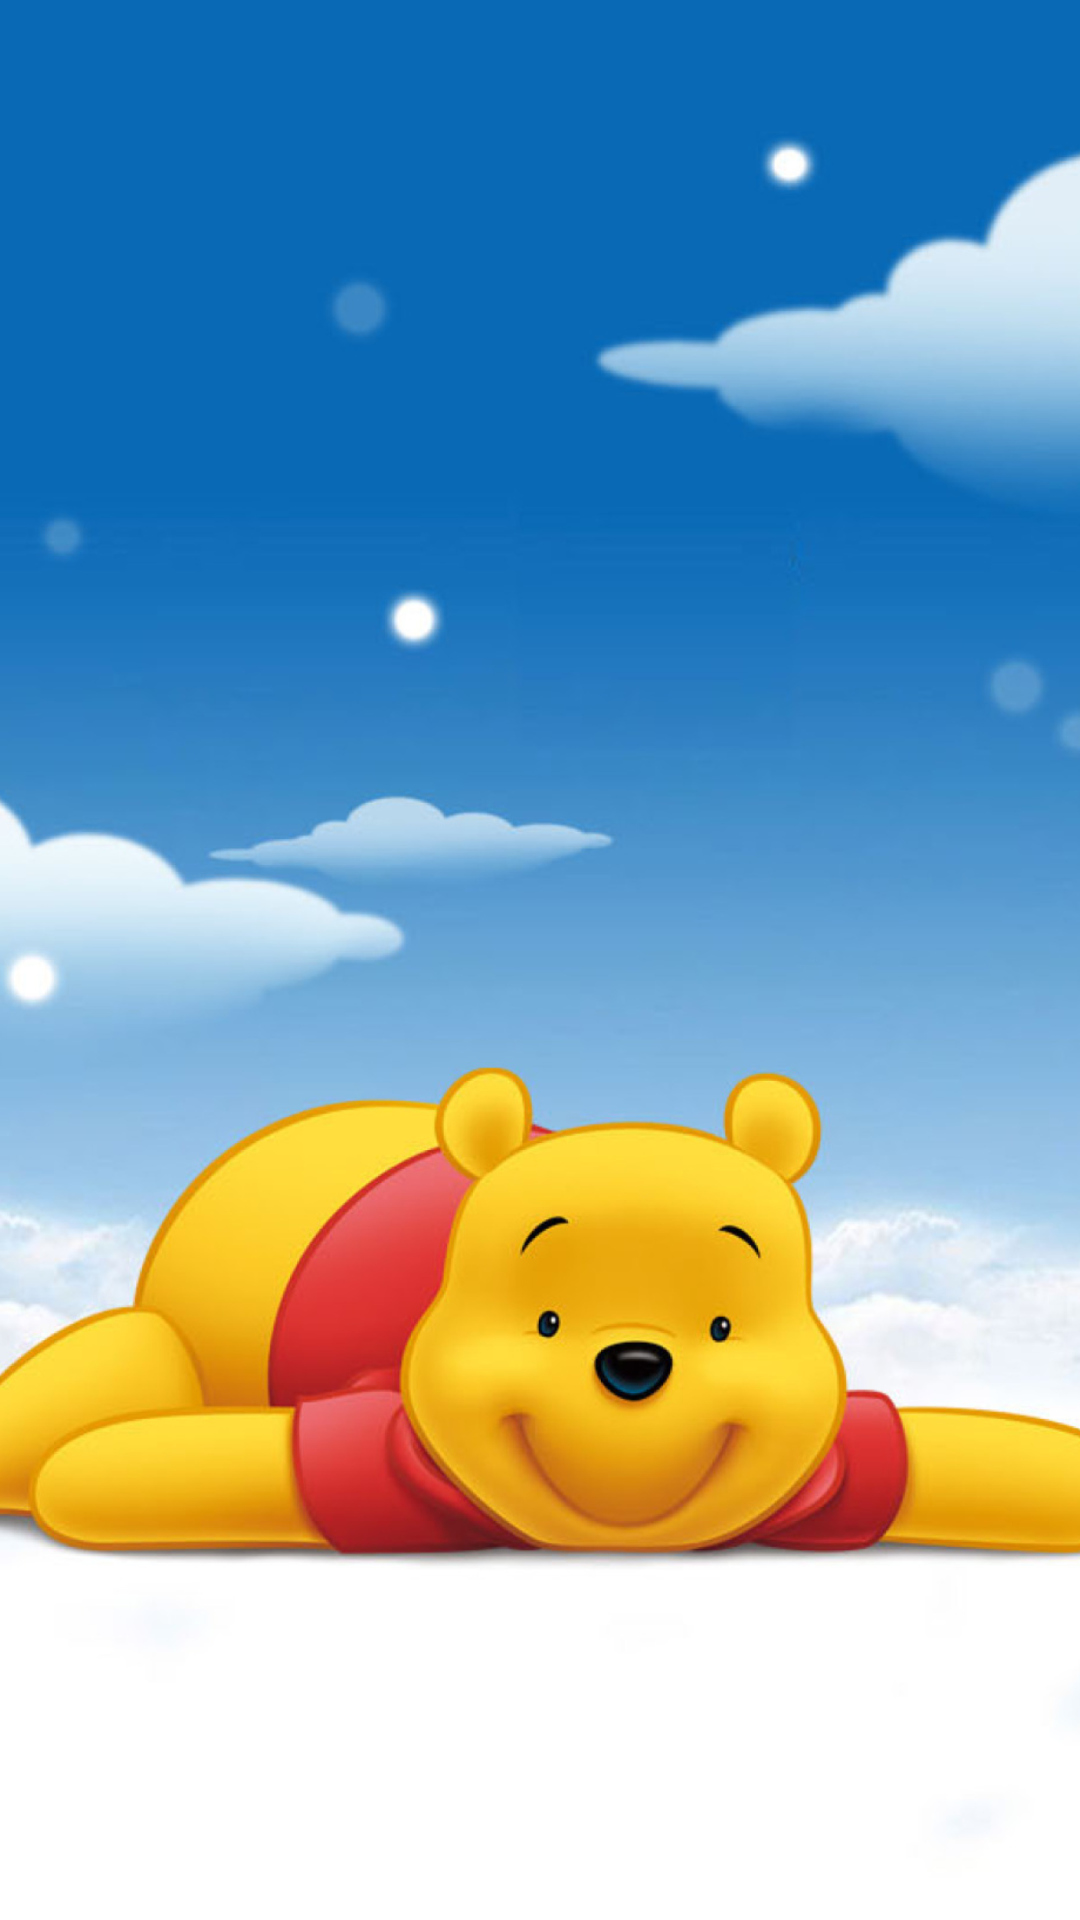 Winnie The Pooh Backgrounds 63 images